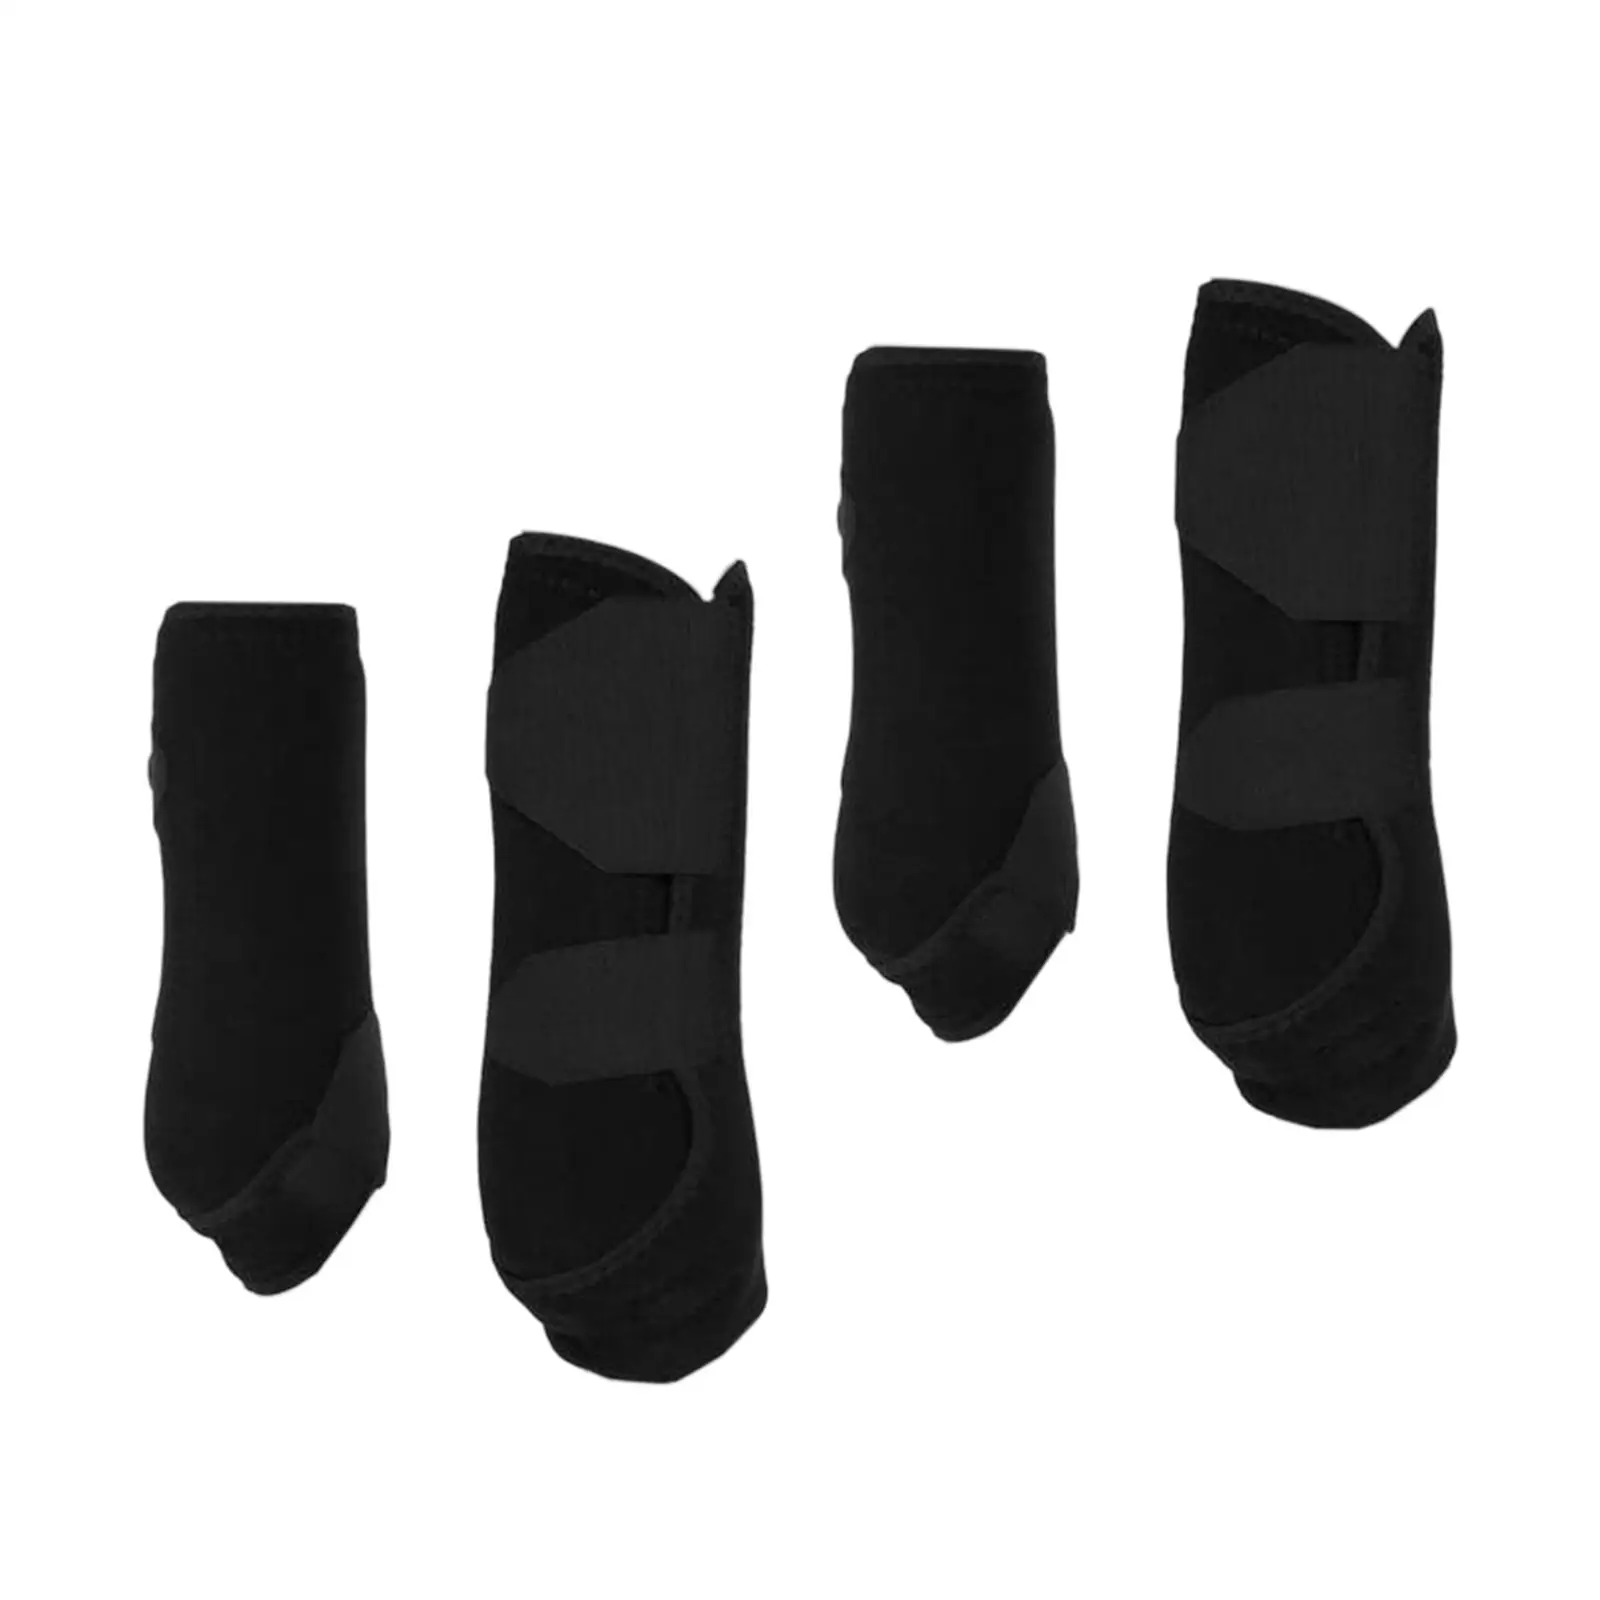 4Pcs Neoprene Horse Boots Leg Protection Wraps Protector Shockproof Leg Guard for Jumping